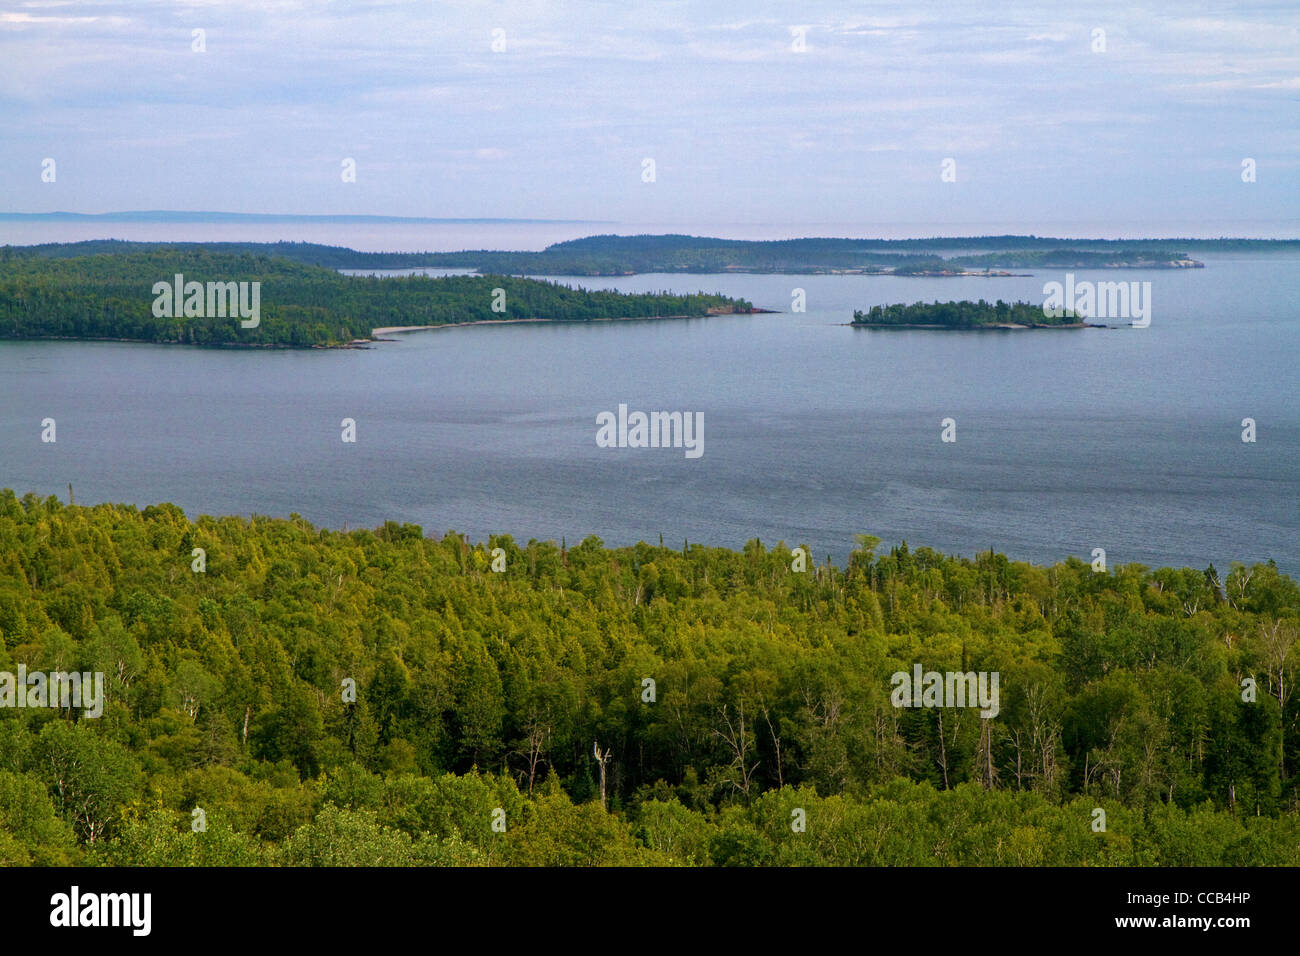 Scenic view of Lake Superior near the Canadian border in Minnesota, USA. Stock Photo